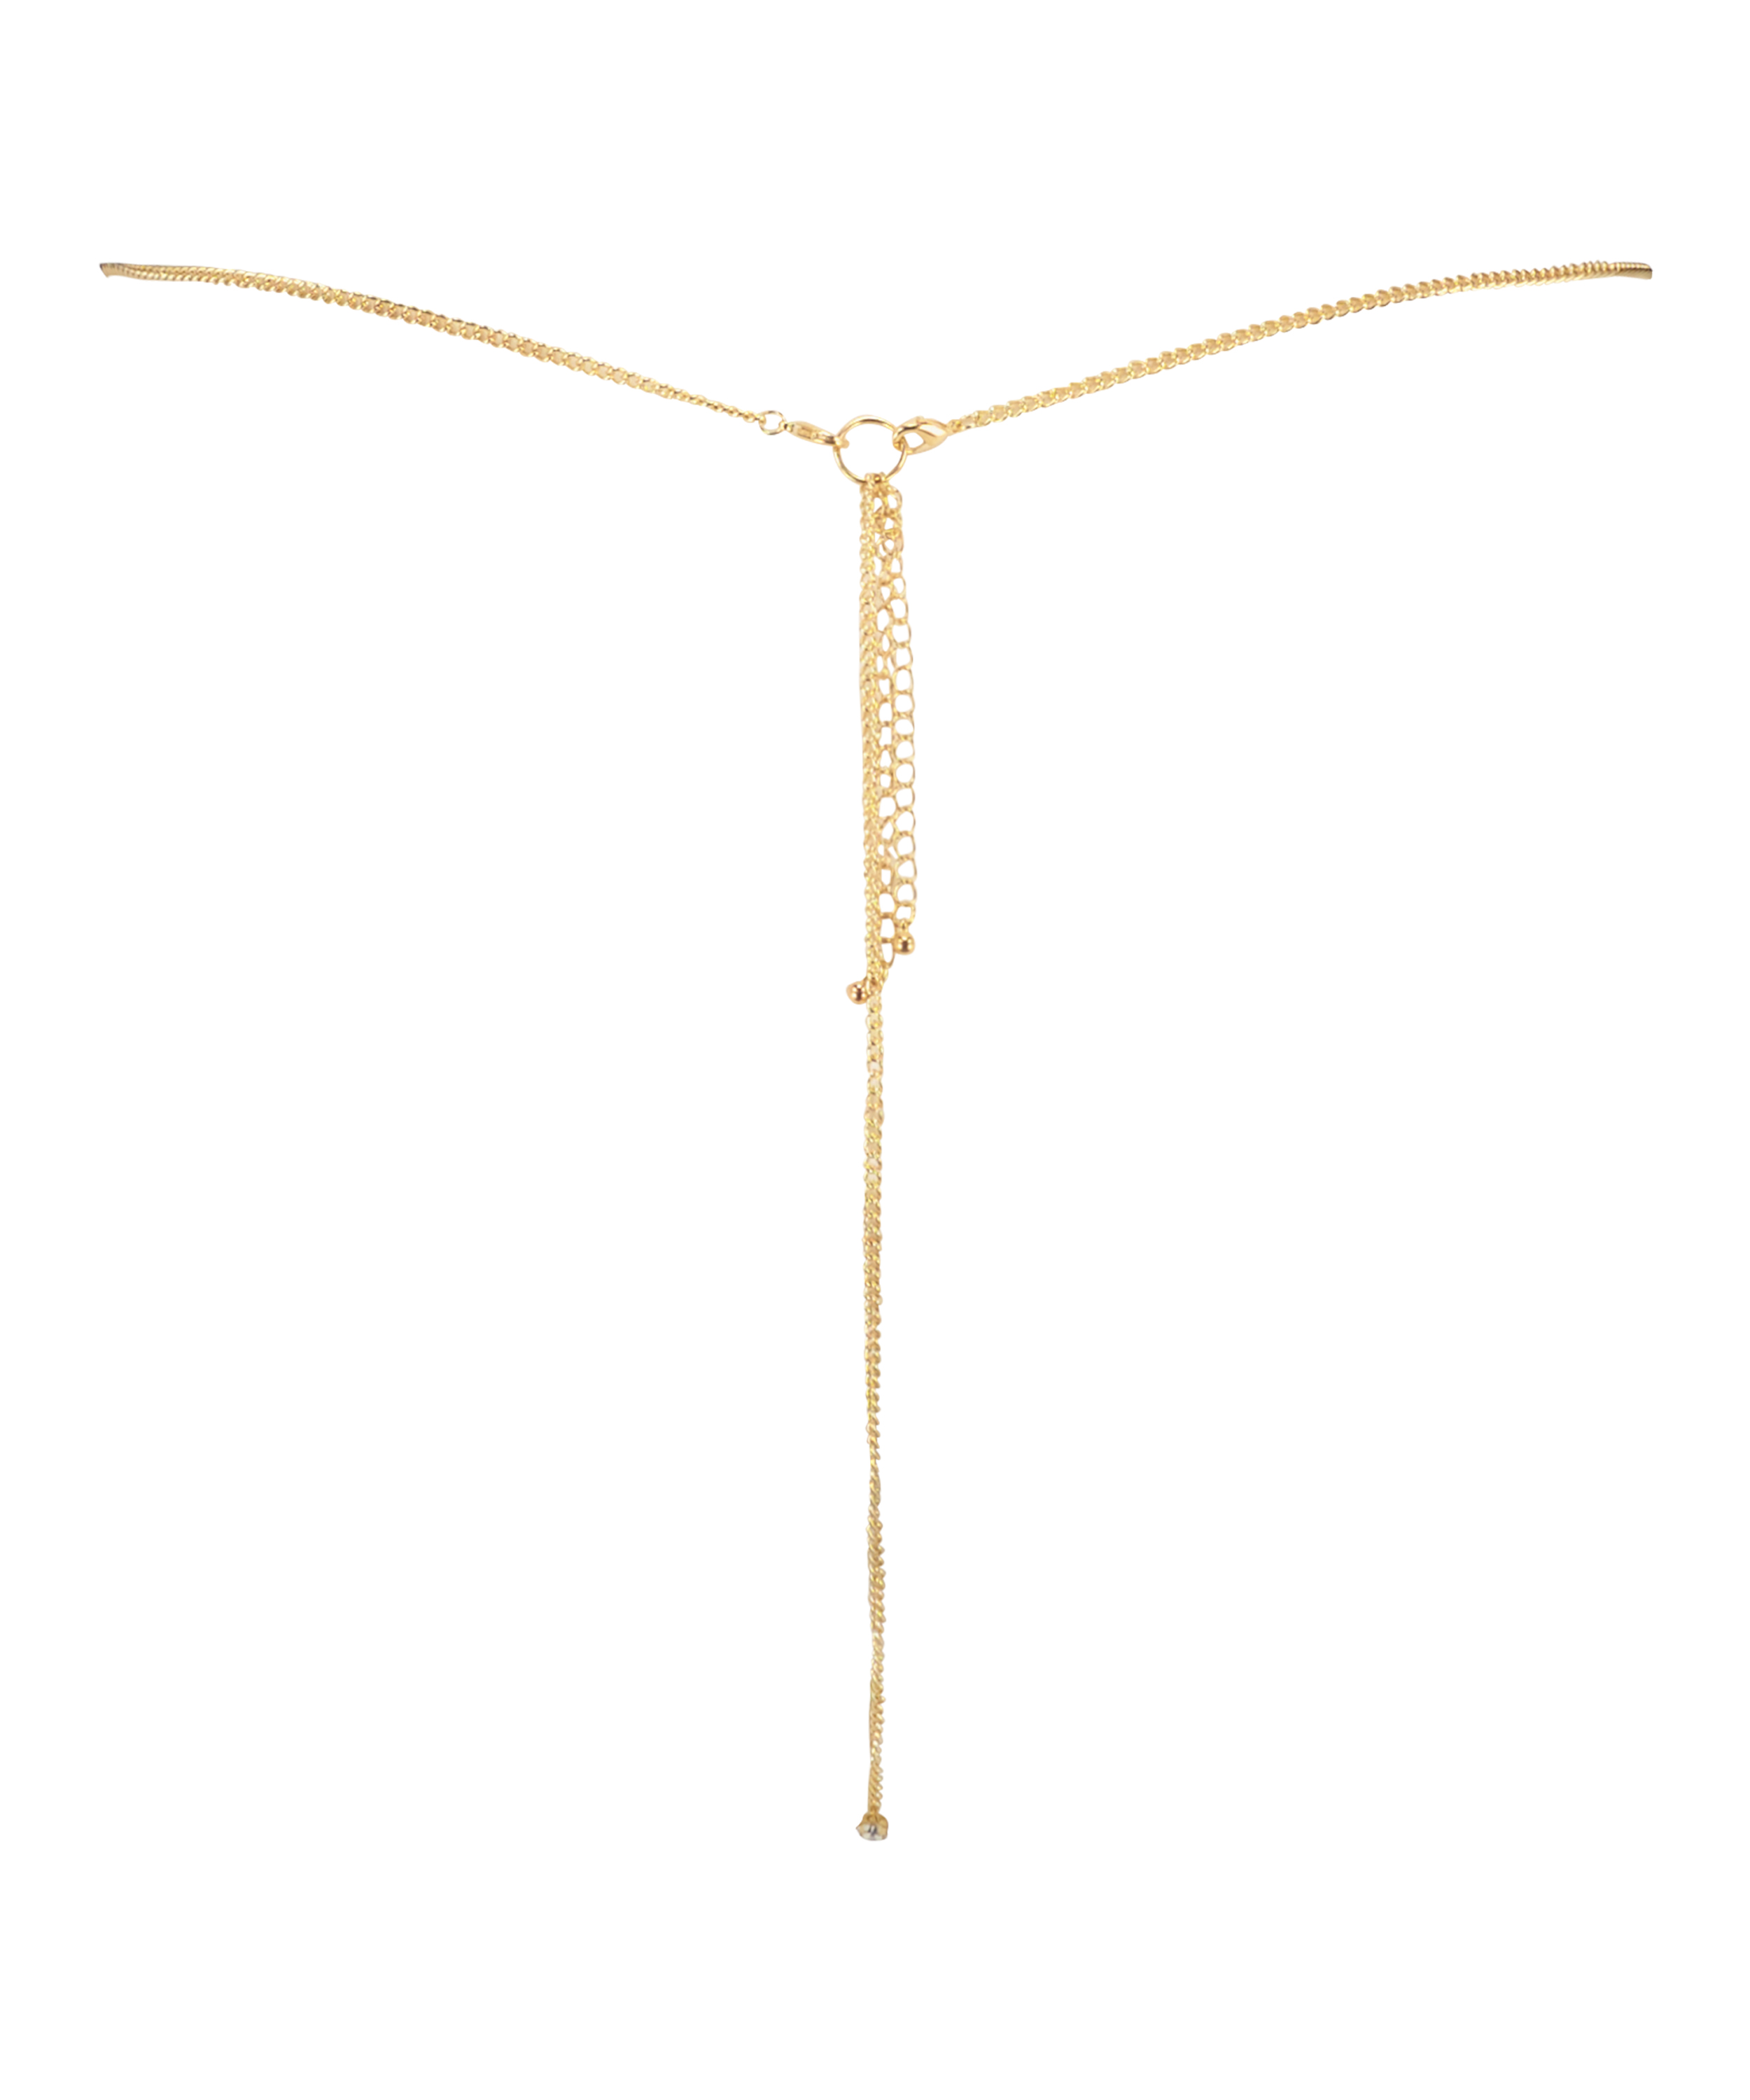 Private chain for €24.99 - Private Collection - Hunkemöller